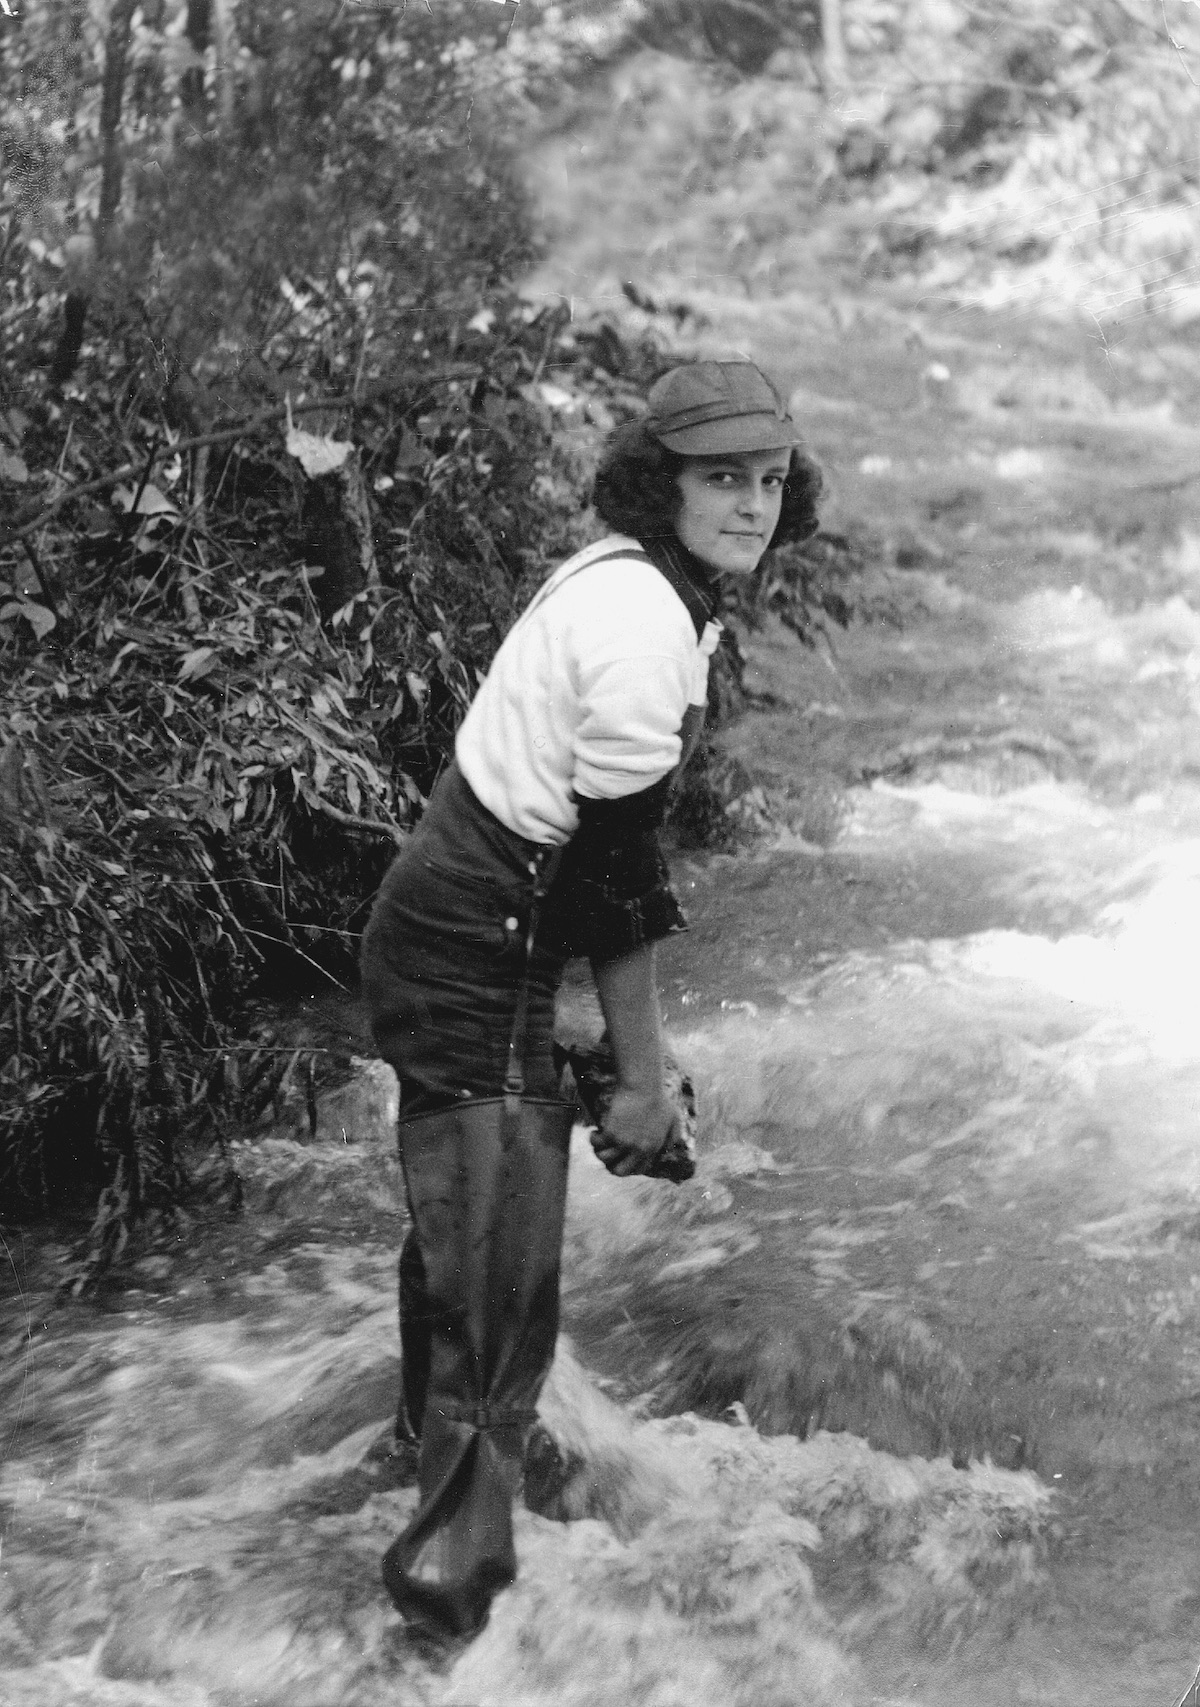 Hawley on her family's Vermont property. [Photo] Courtesy of the Michael and Meg Leonard collection